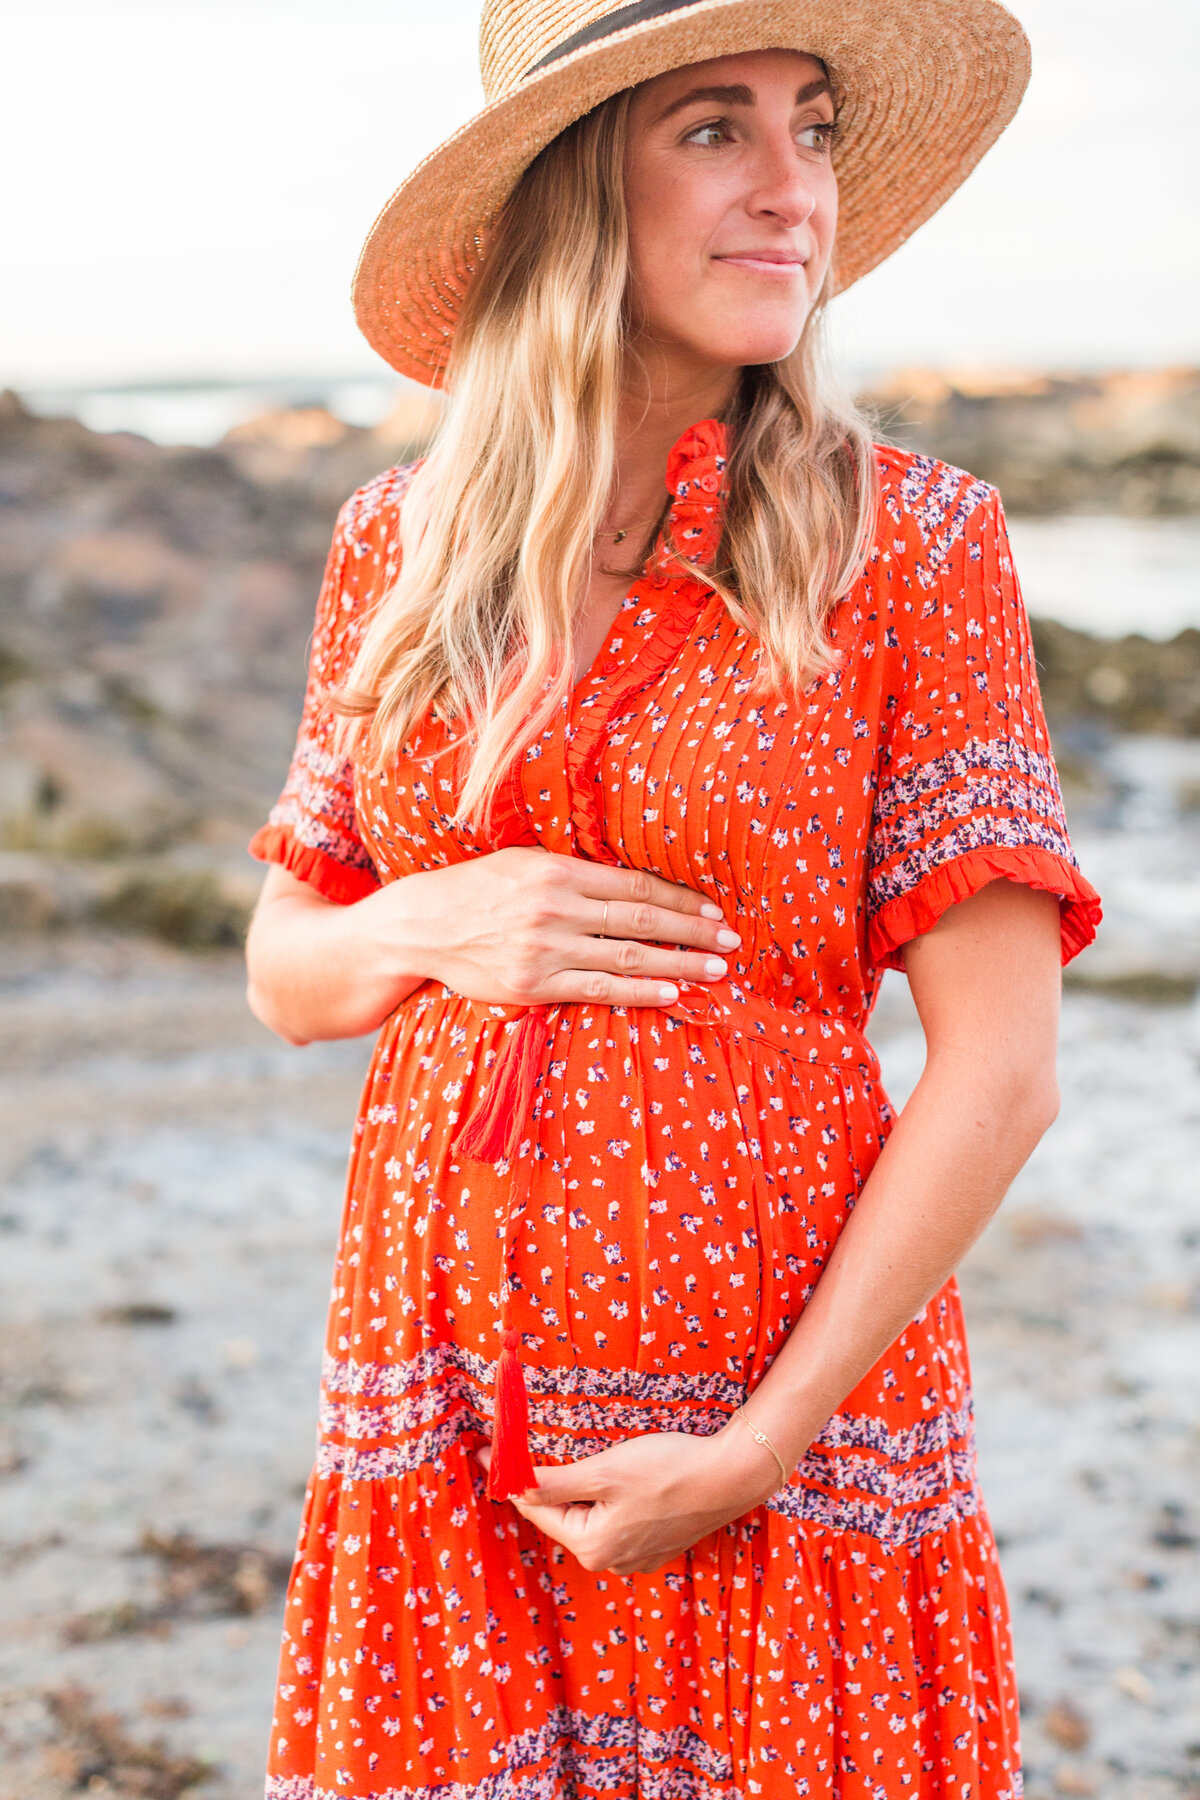 Glowing mom to be wearing straw hat on beach